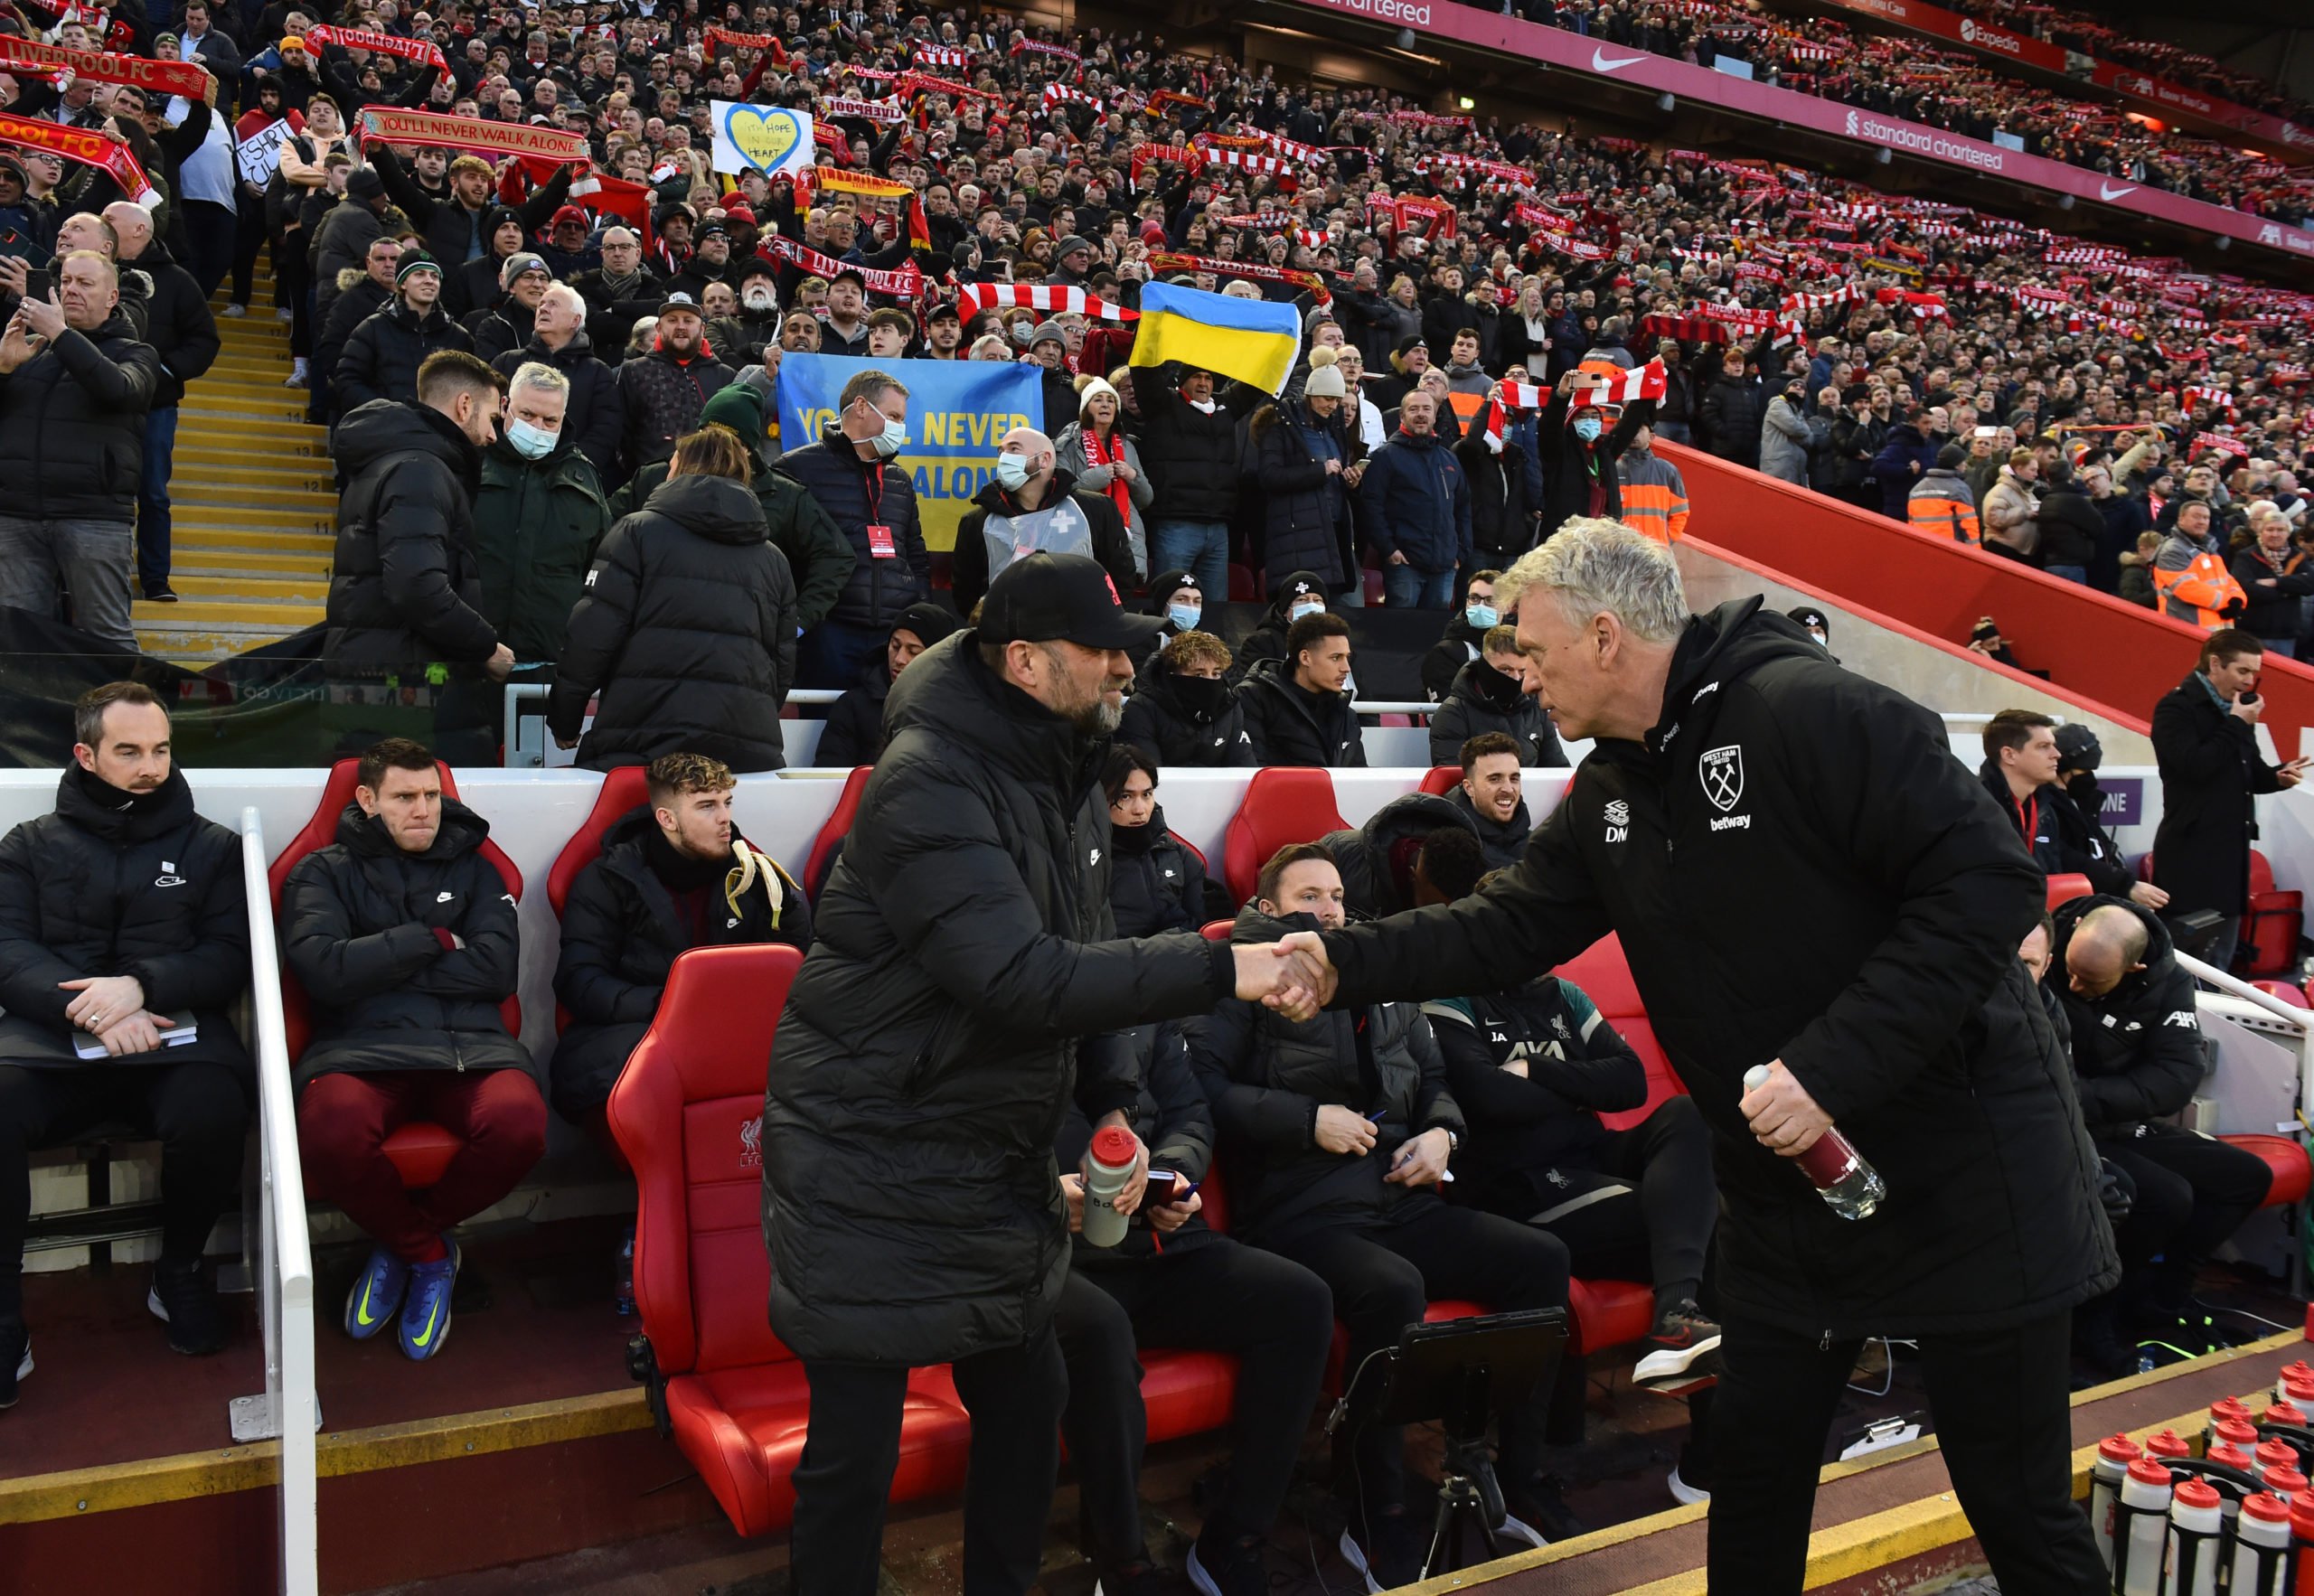 David Moyes admits he asked Jurgen Klopp for advice before West Ham played Liverpool last night